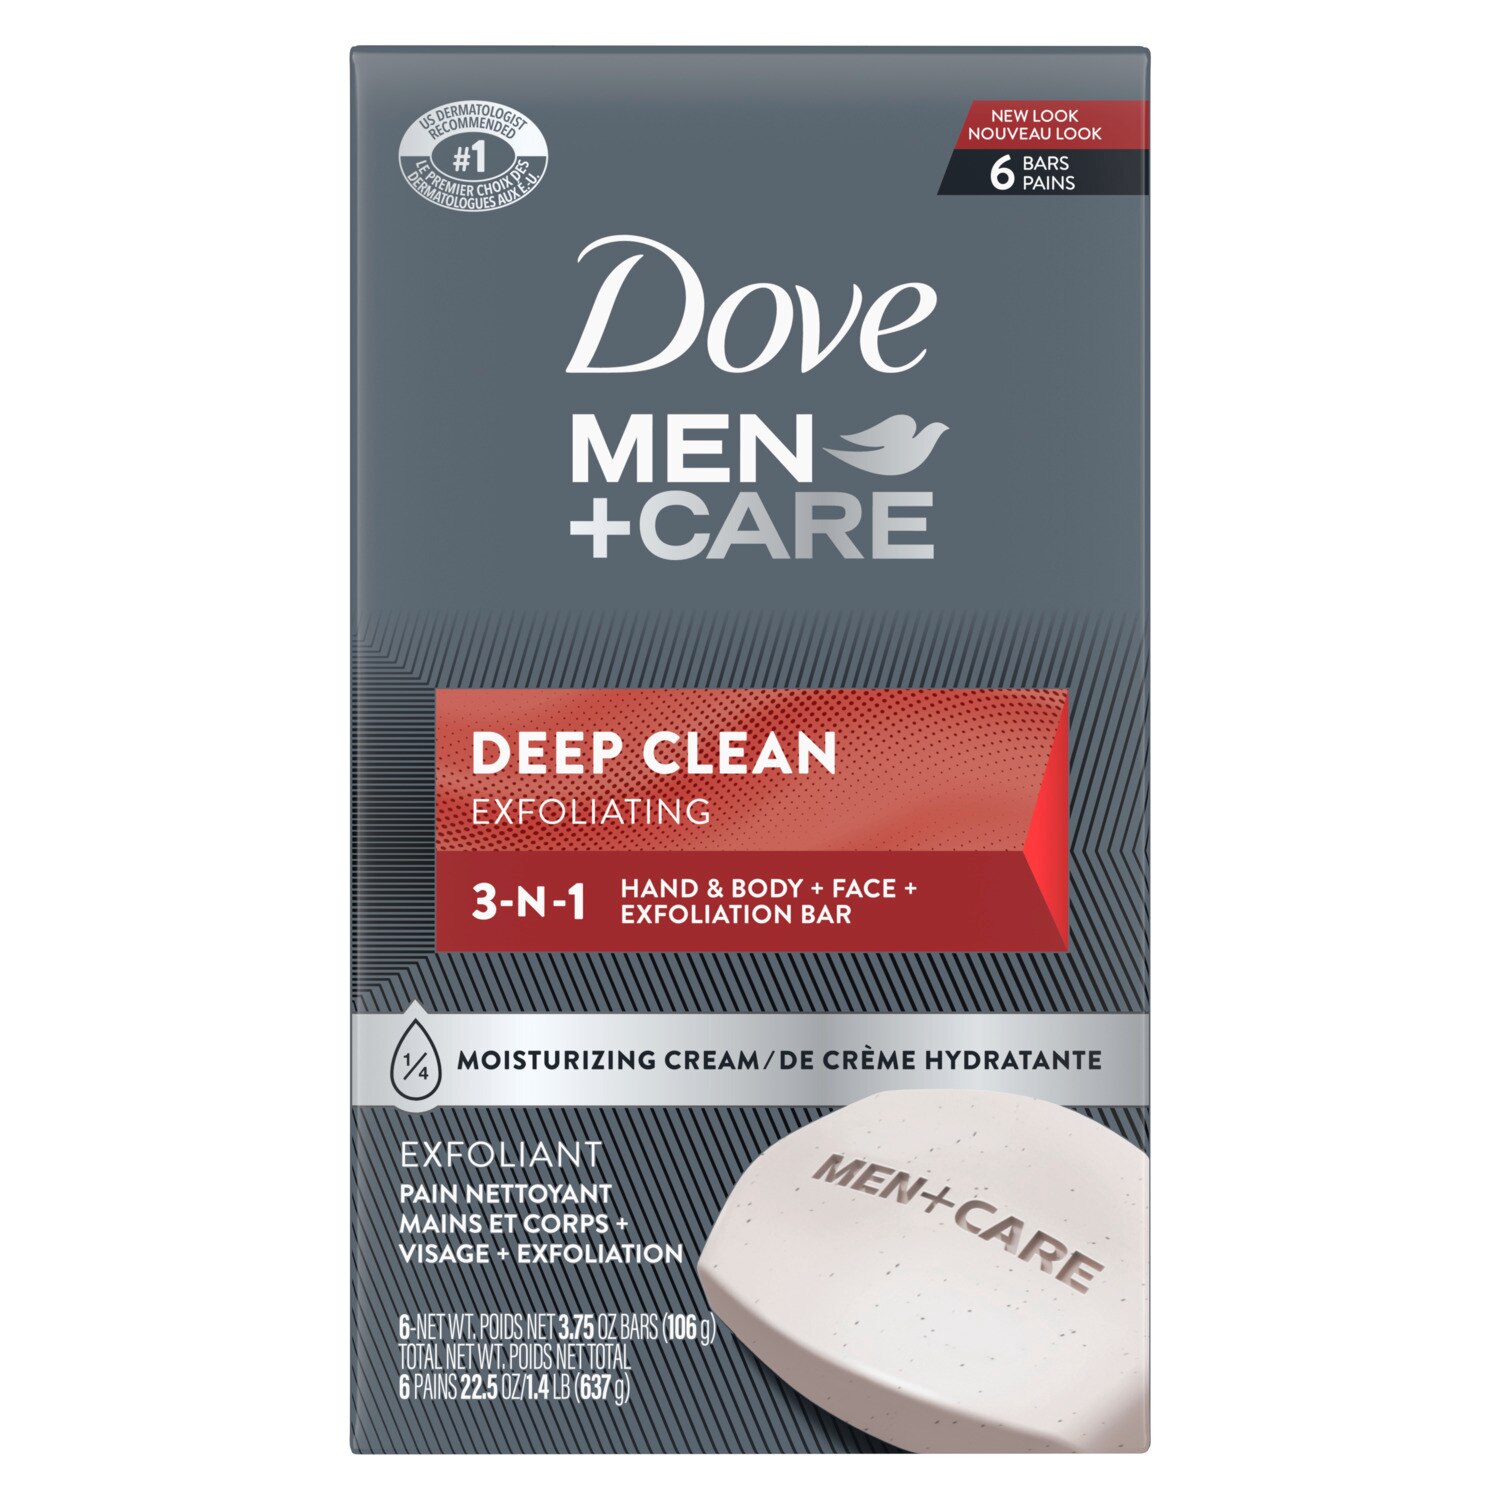 Dove Men+Care, Skin Nourishing, Deep Clean Body Soap and Face Bar, 6 CT